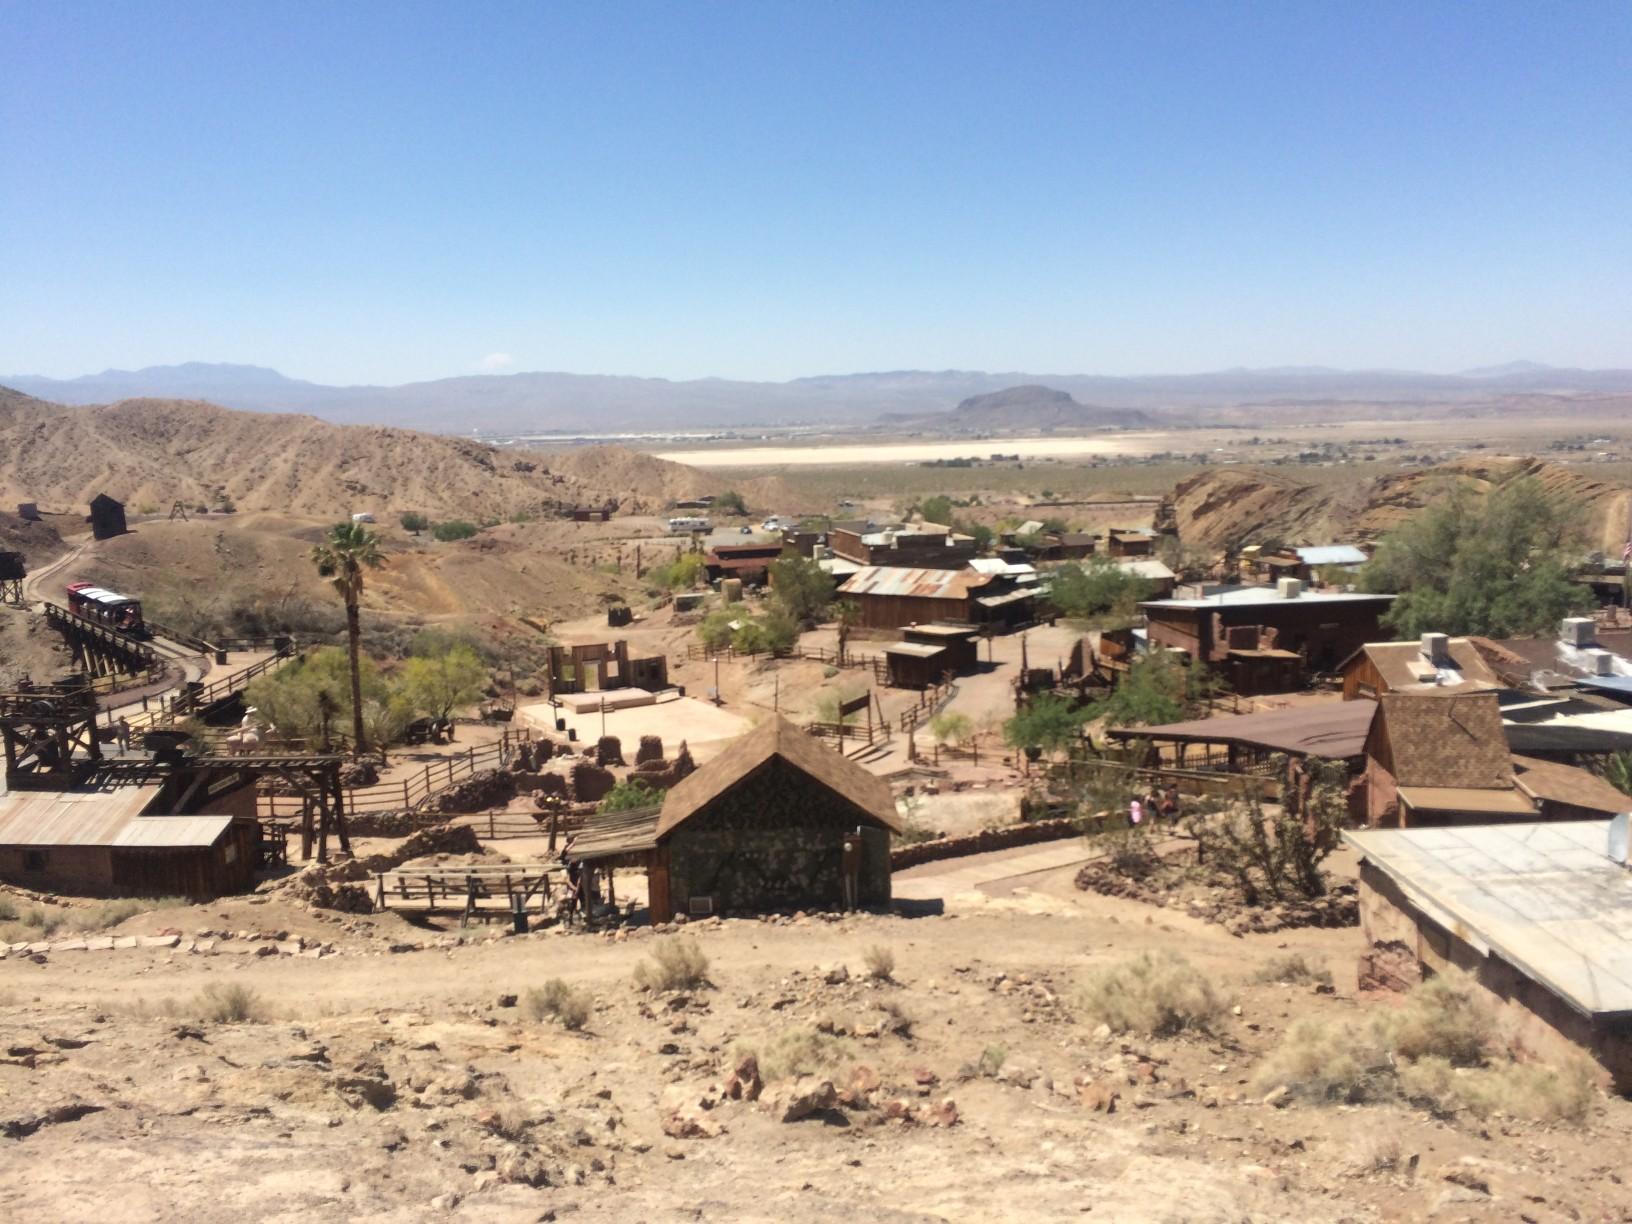 Calico Ghost Town Barstow, California